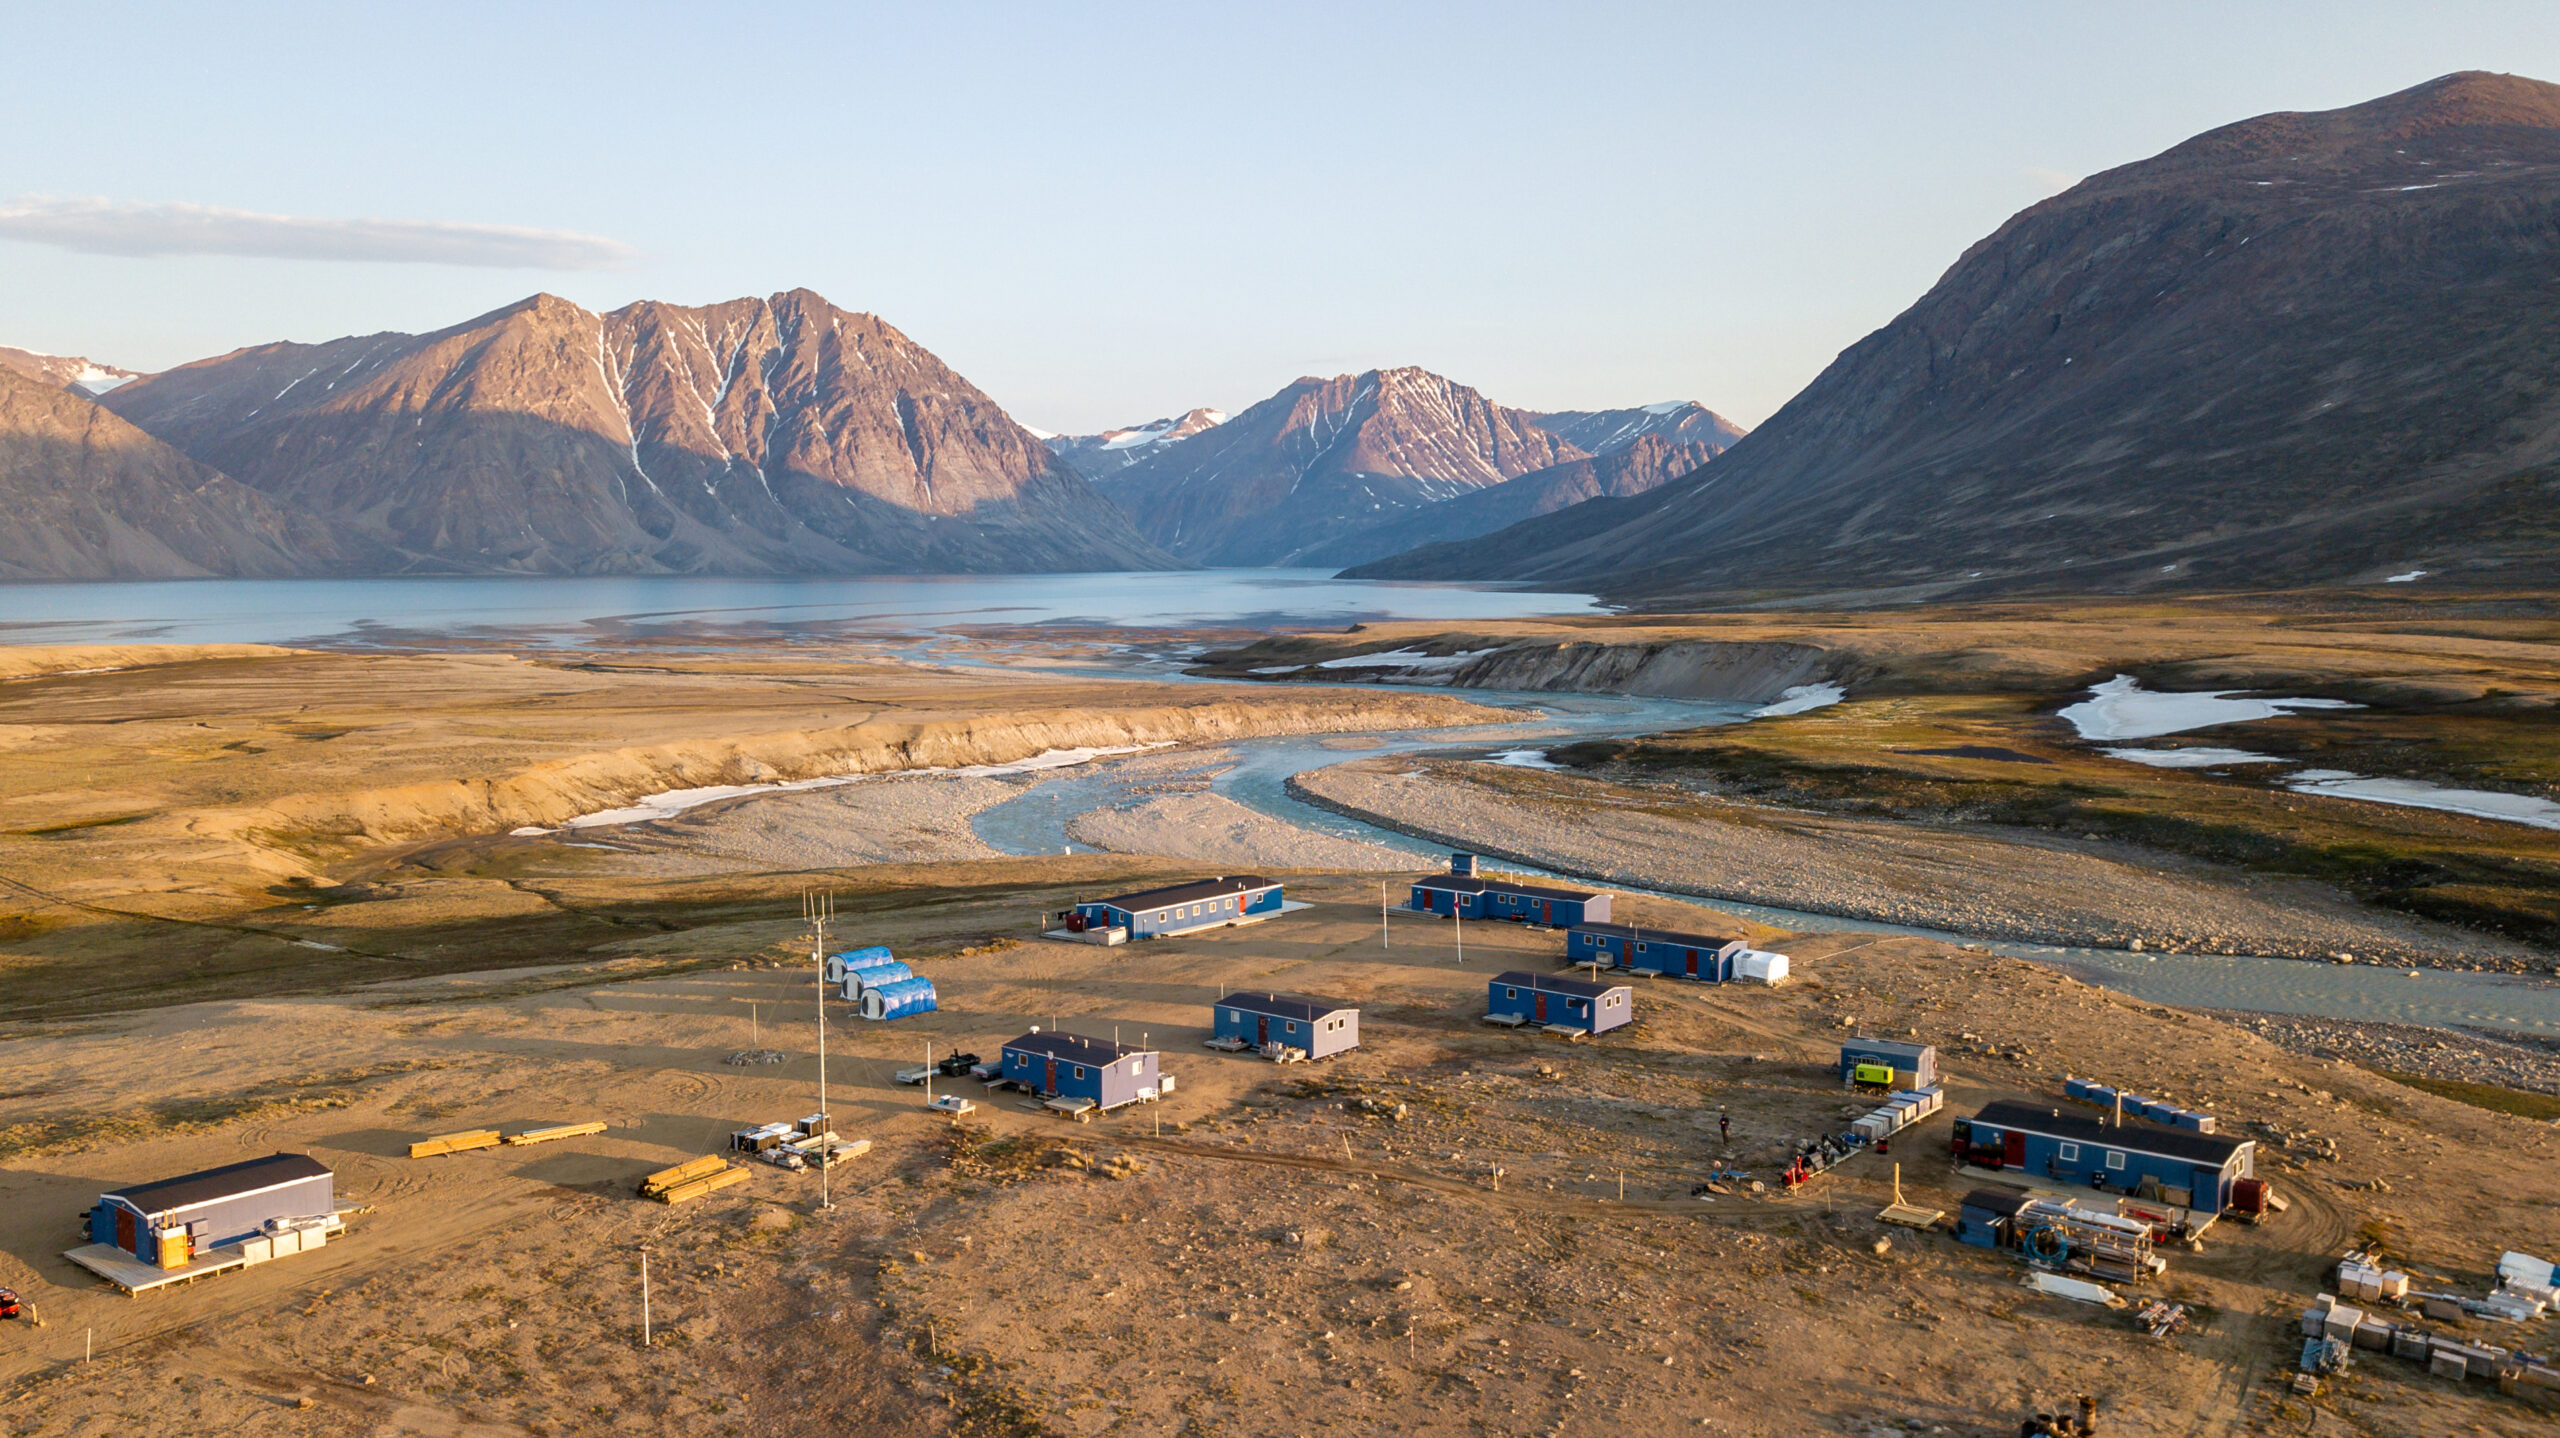 The high arctic ecosystem at Zackenberg Research Station in remote Northeast Greenland has been monitored since 1996 as part of the Greenland Ecosystem Monitoring program. The station is owned by the Greenland Government and run by Aarhus University, Denmark. Credit: Piotr Łukasik.